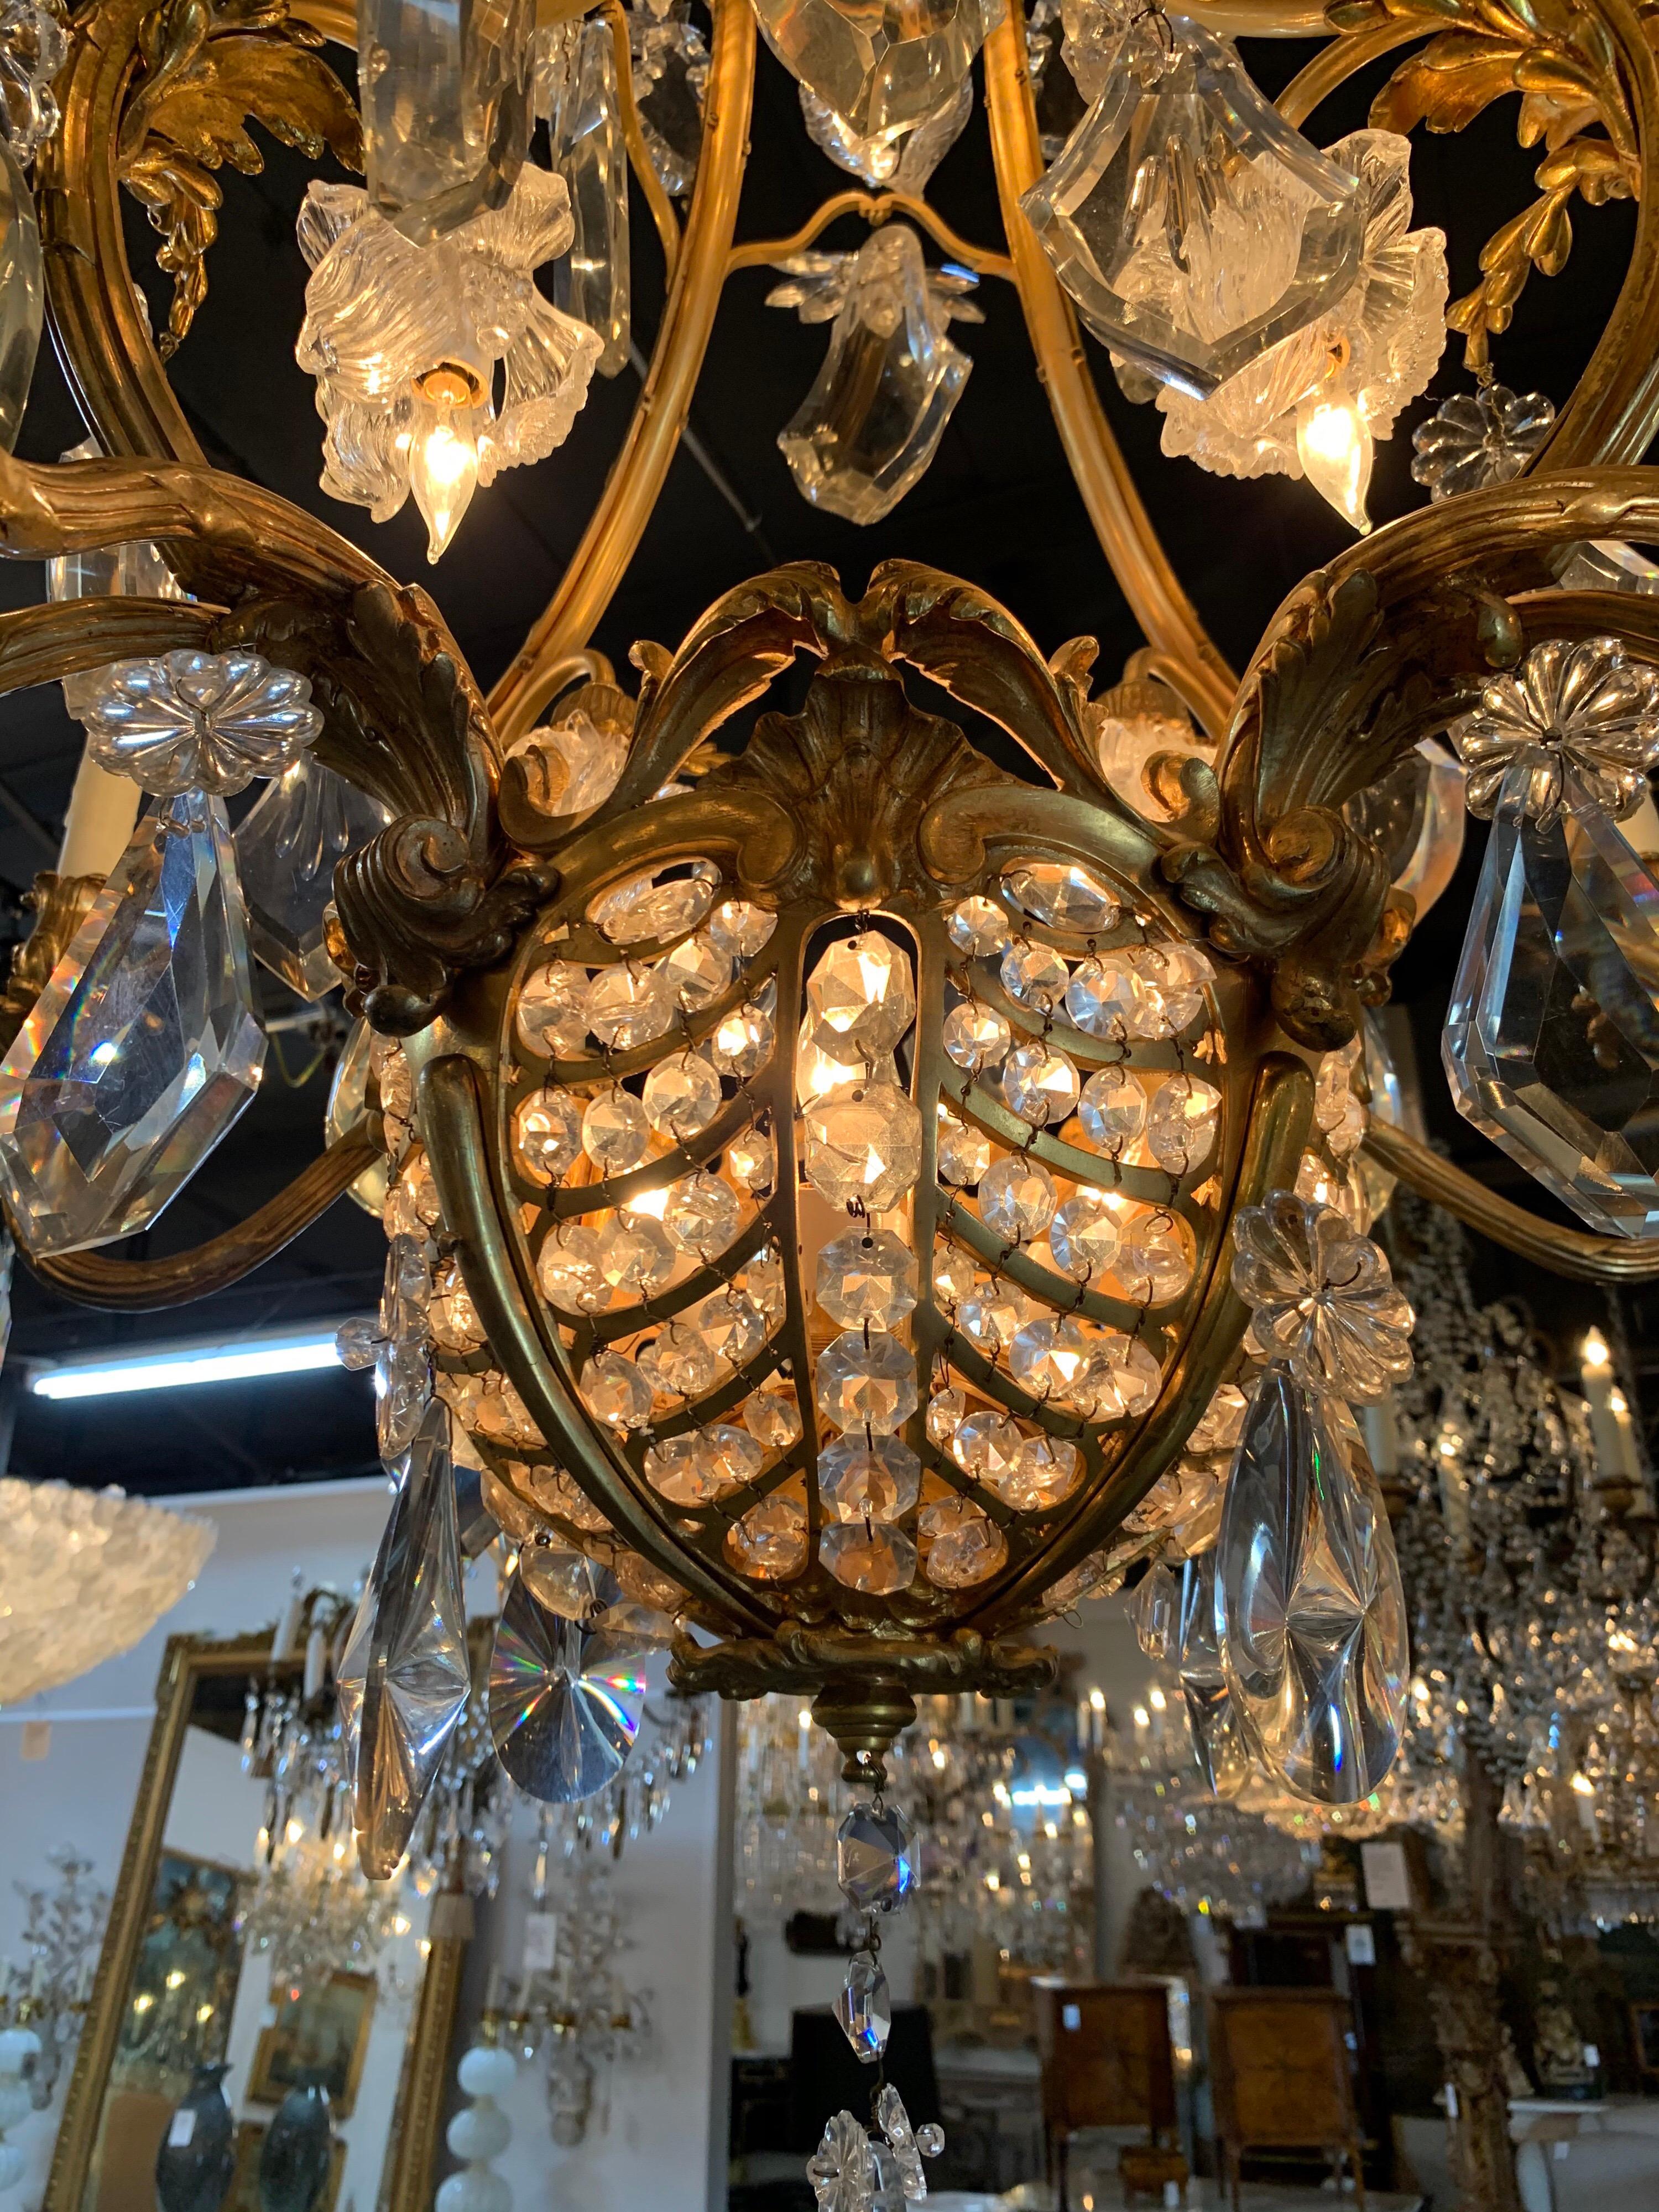 Truly exceptional 19th century belle epoche bronze and crystal chandelier. The crystals are amazing on this fixture and are possibly Baccarat. Lighting is especially pretty, with some of the lights inside a cluster of crystals. The bronze is also